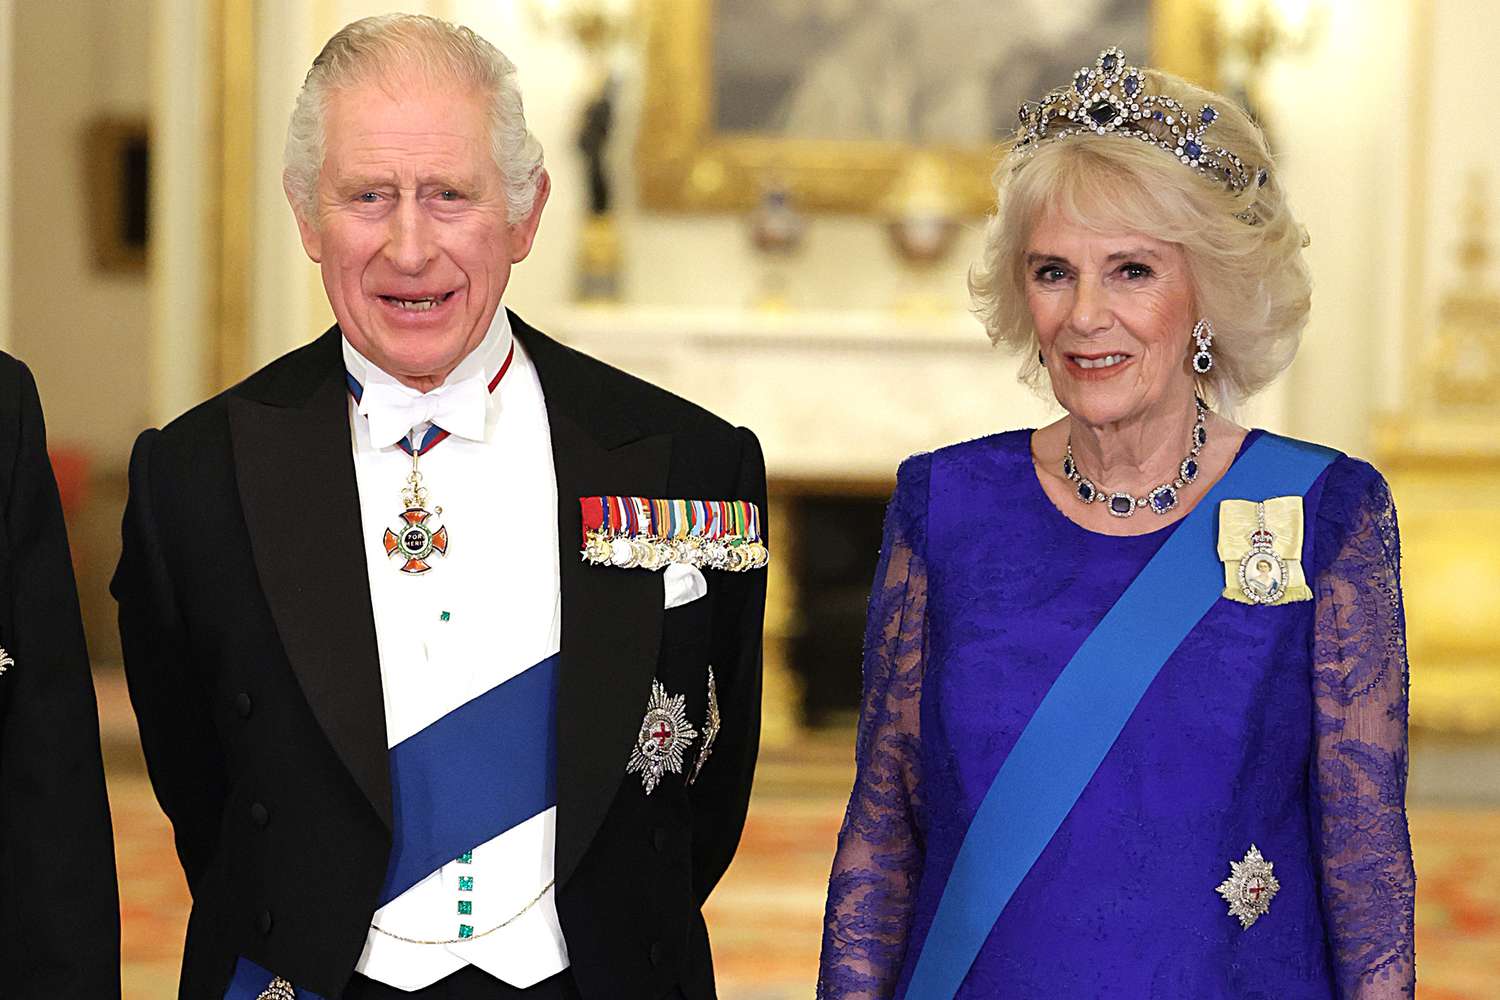 King Charles III The Procession and Coronation Schedule